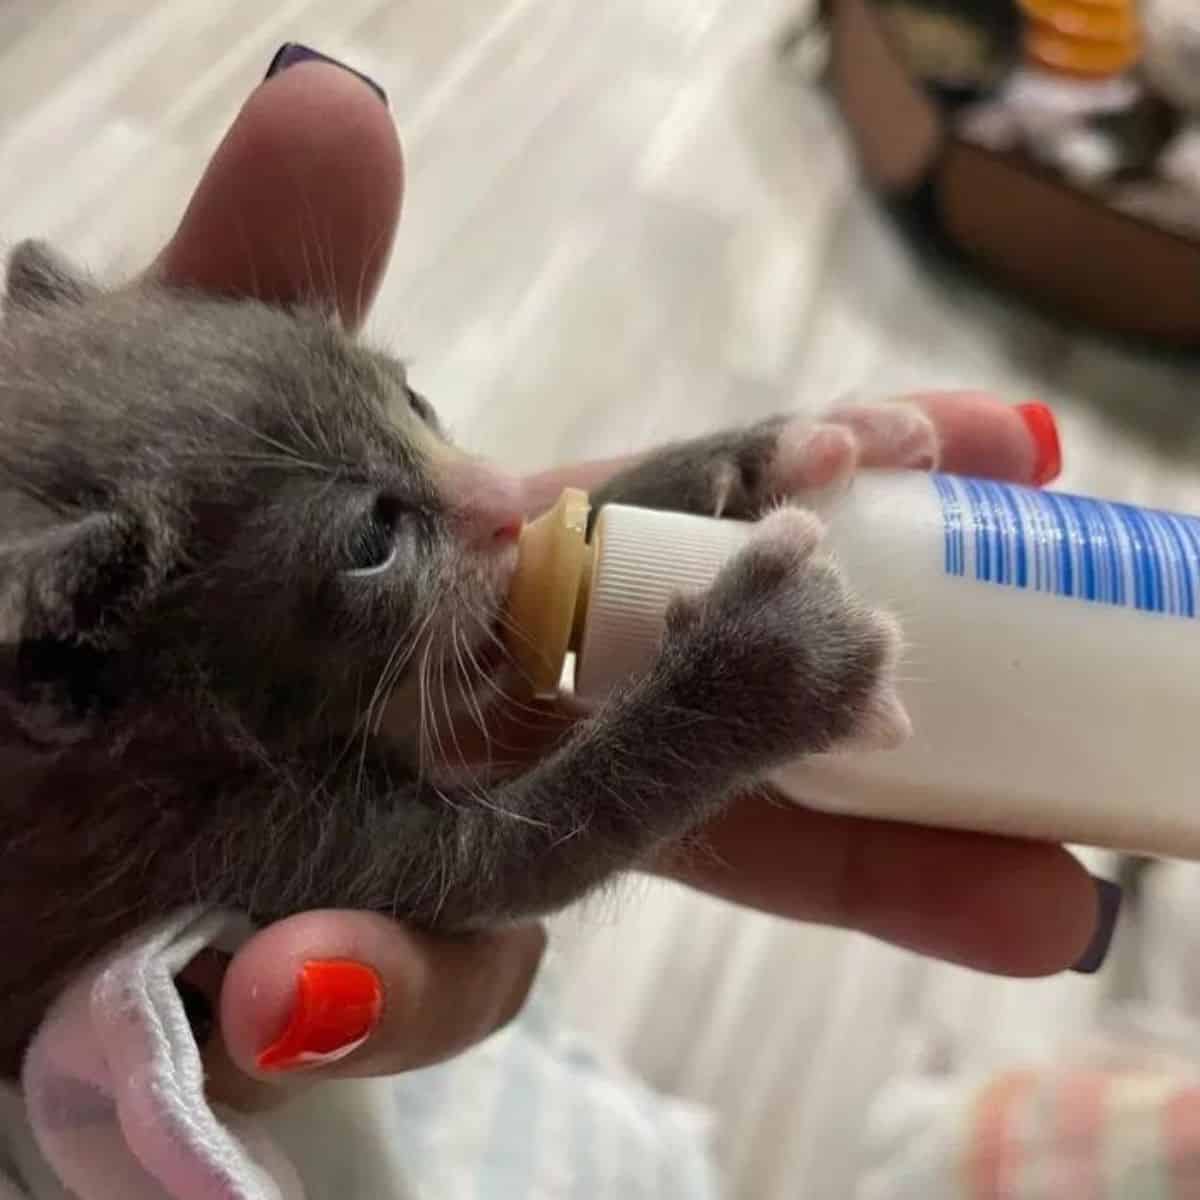 the cat drinks milk from the bottle